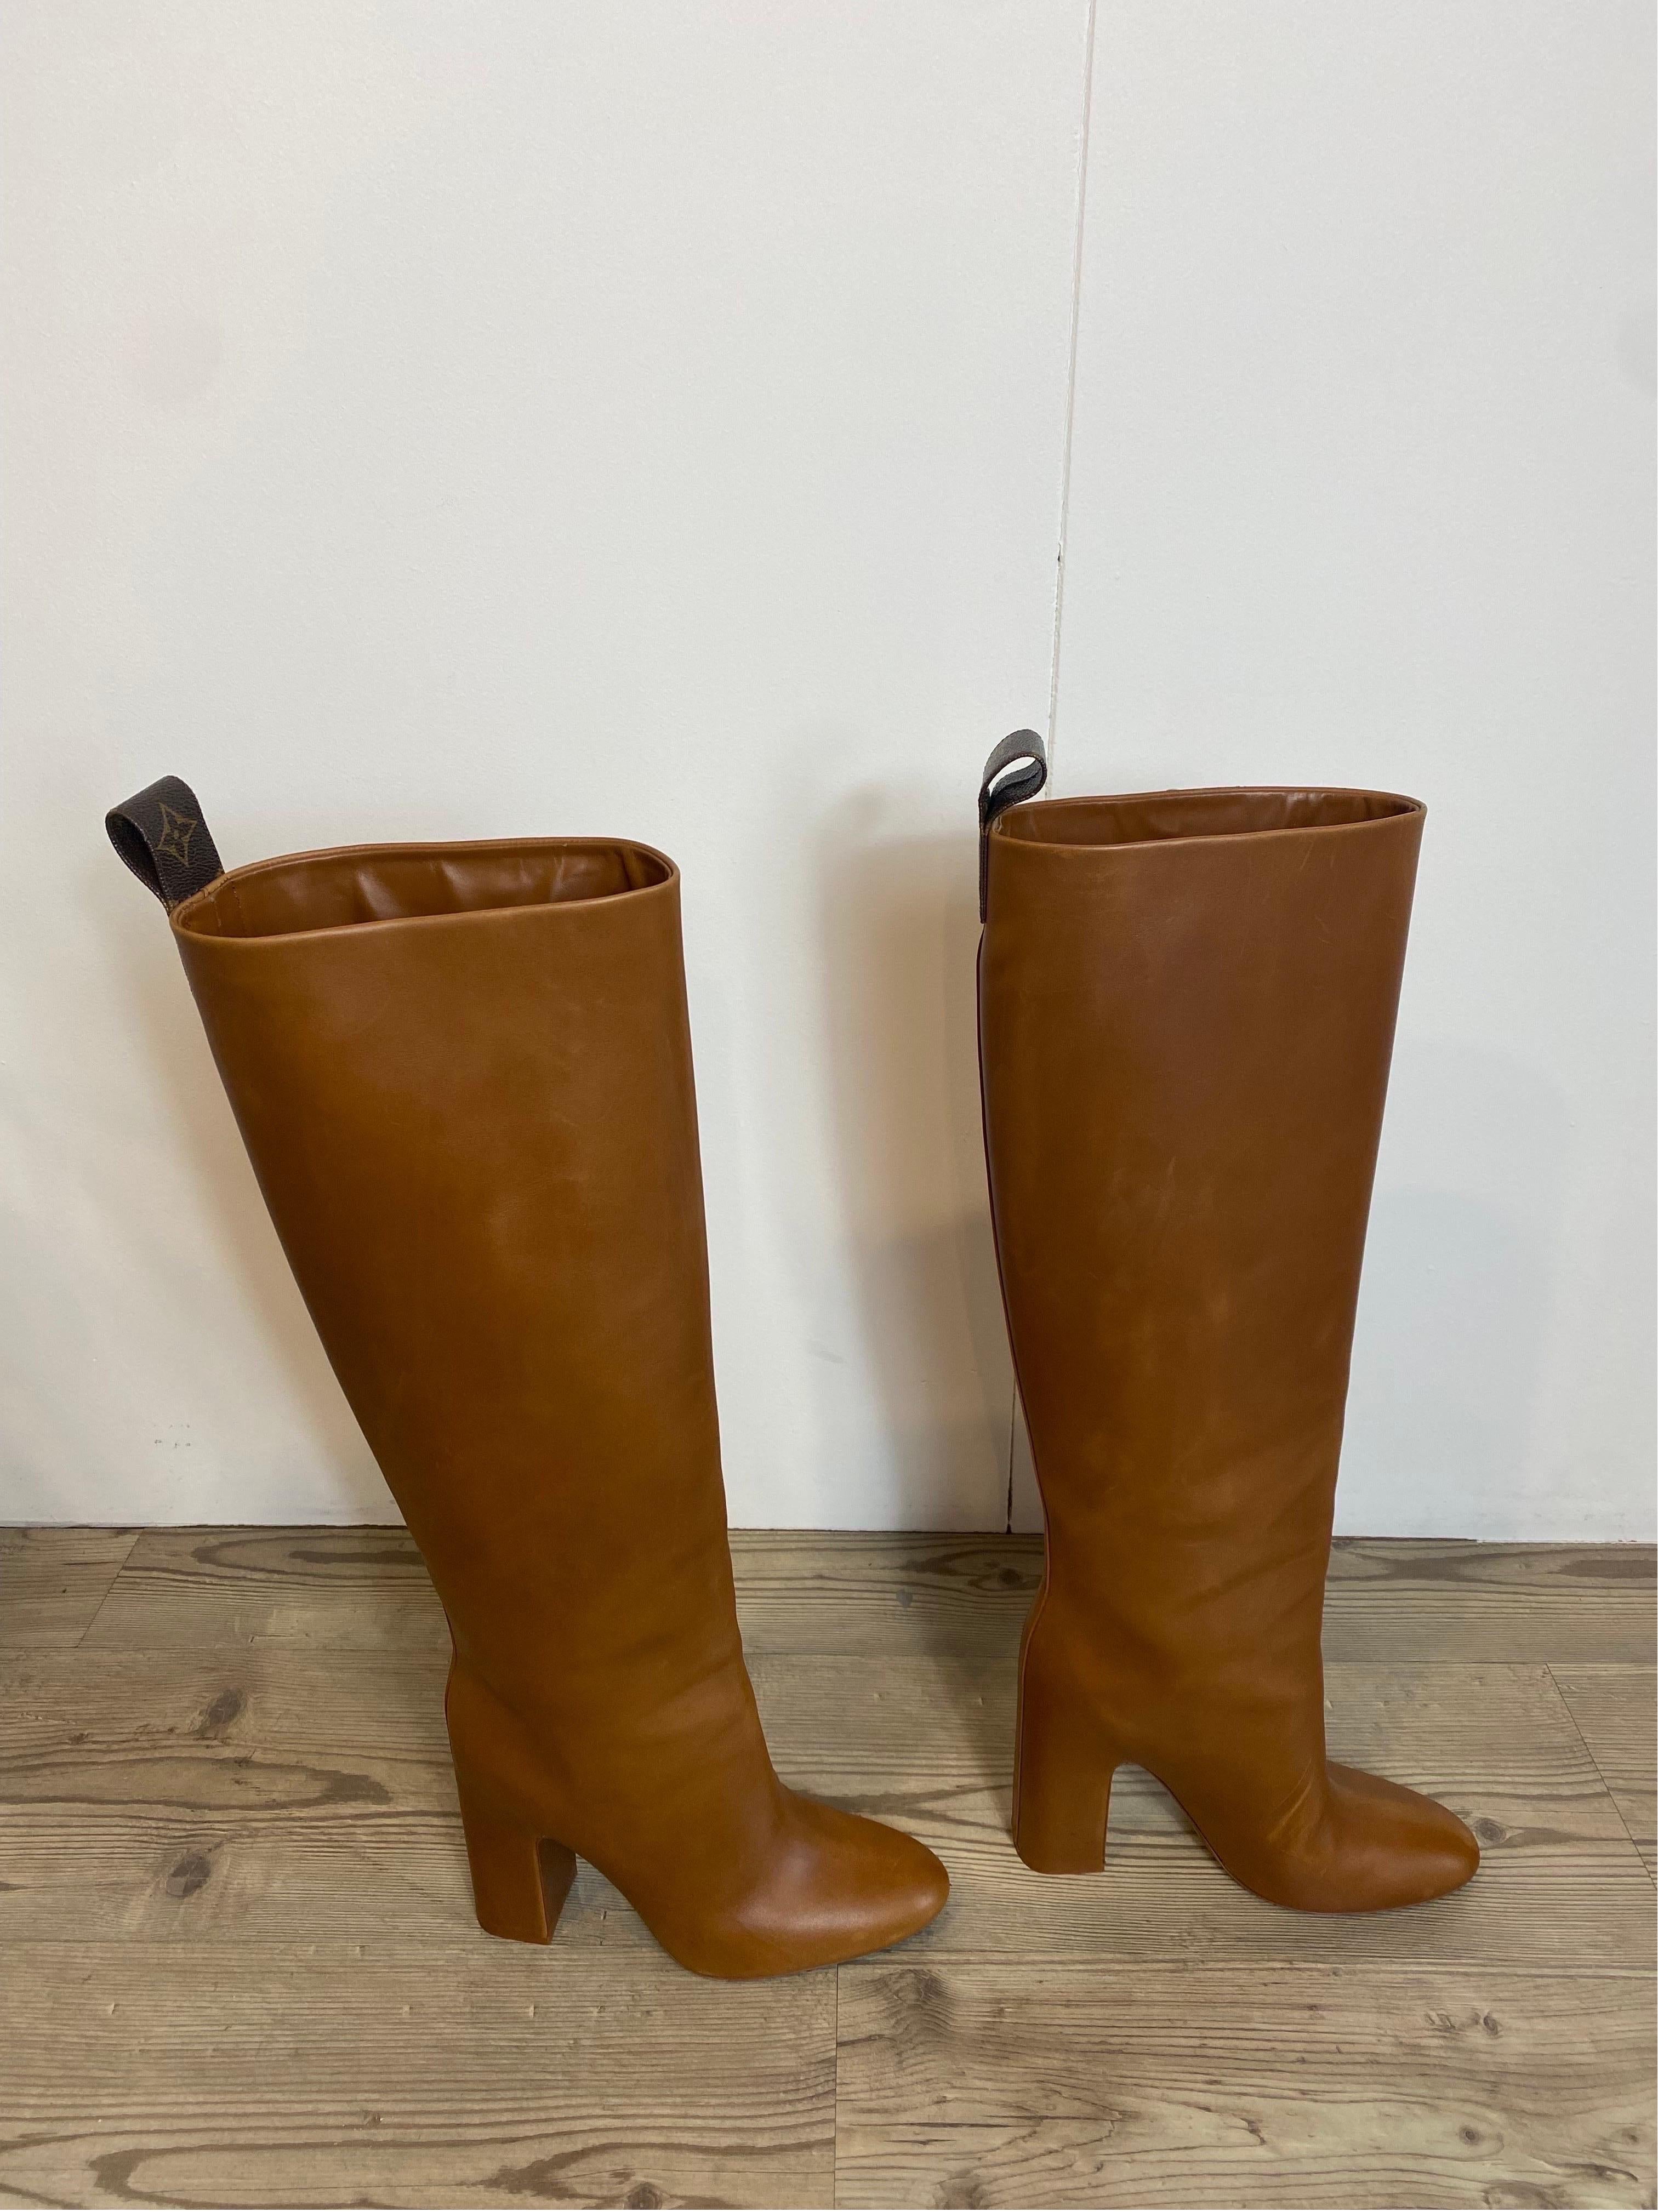 Louis Vuitton boots.
In leather with LV print detail.
Italian number 40.
Heel 13 cm
Total length 55 cm
In good general condition, with signs of normal use as shown in the photos.
They have original dust bag.